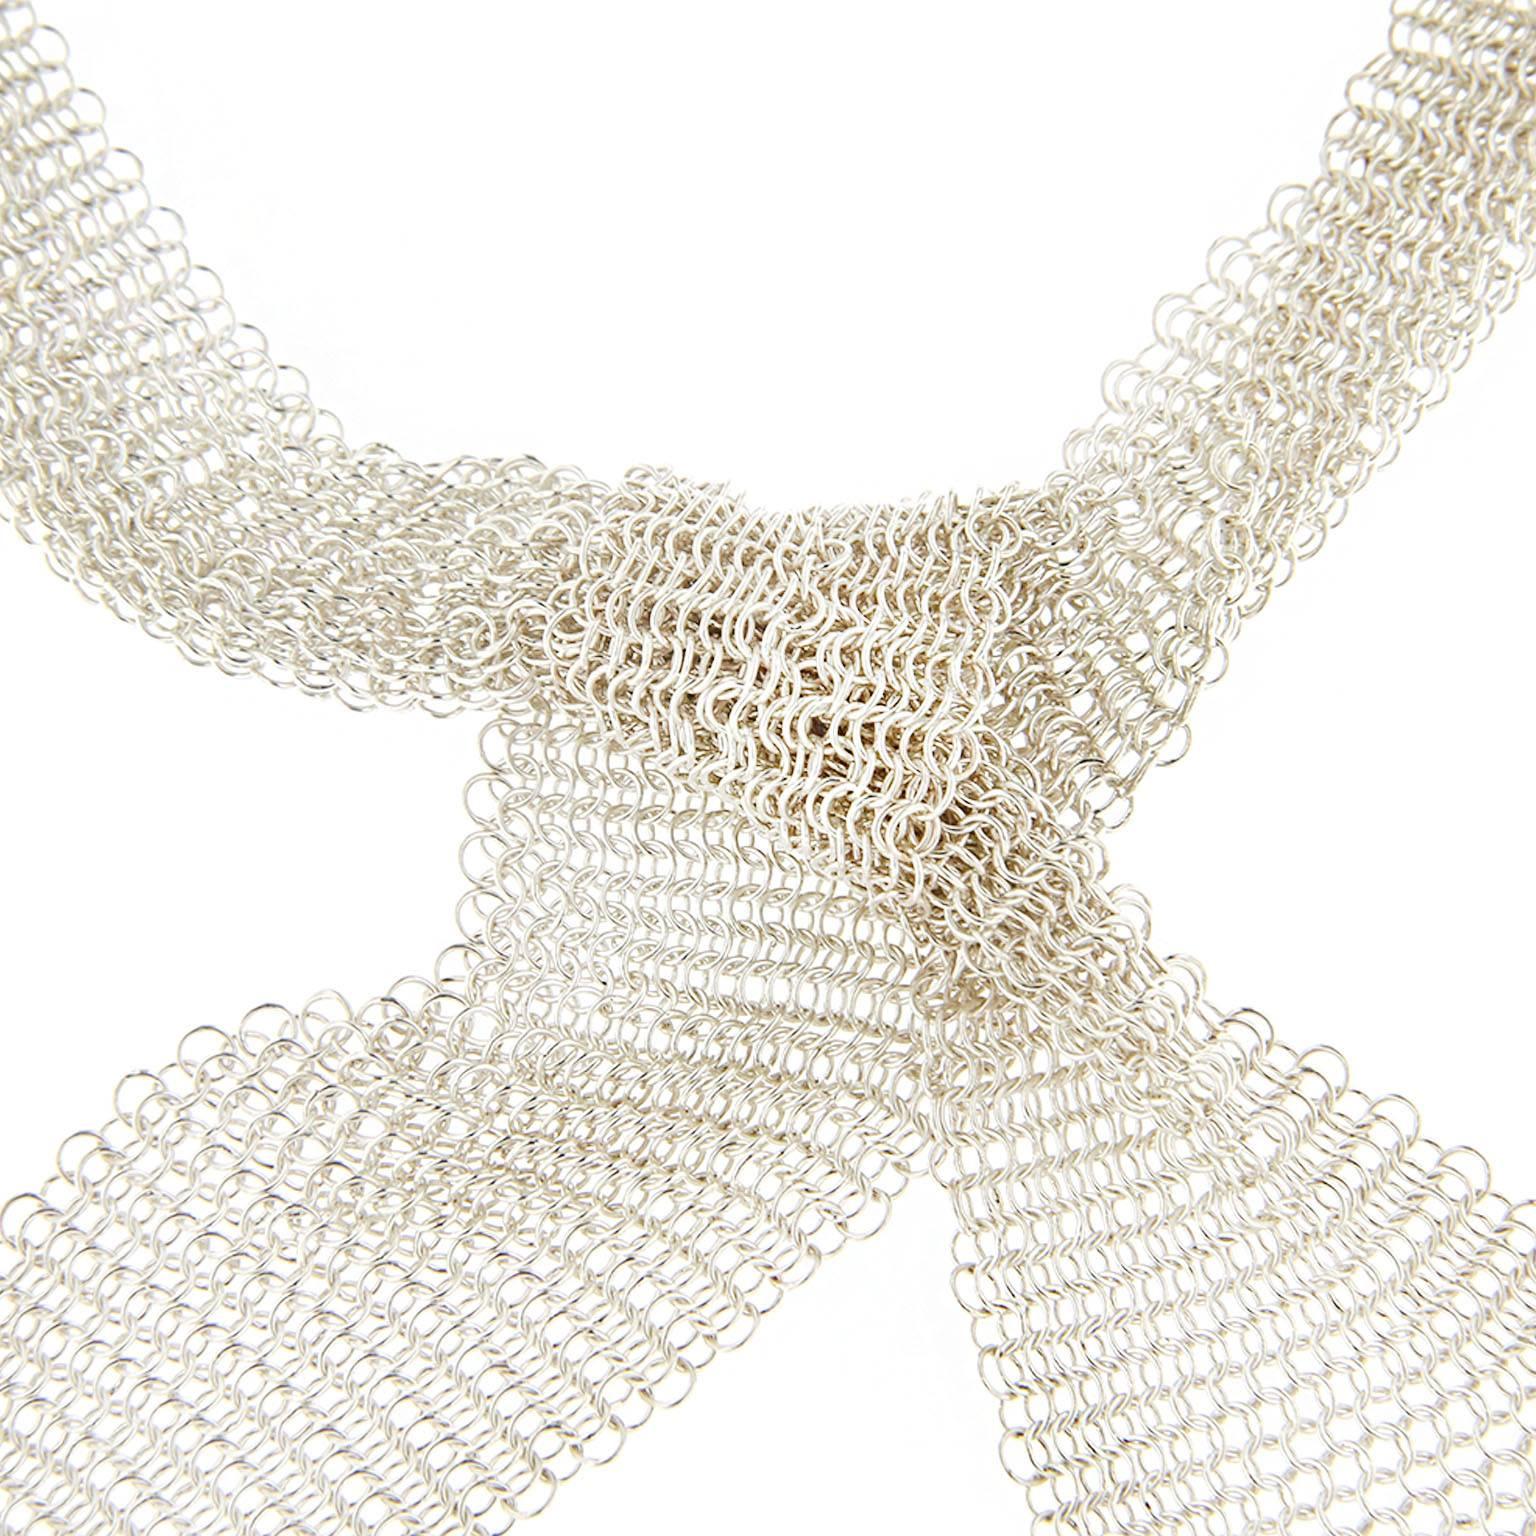 Jona Collection, hand crafted in Italy, Sterling Silver continuous mesh Tie Scarf / Necklace. This necklace is 30mm-1.18 inch wide and 114cm-45 inches long, with a total weight of 134 grams.

All Jona jewelry is new and has never been previously